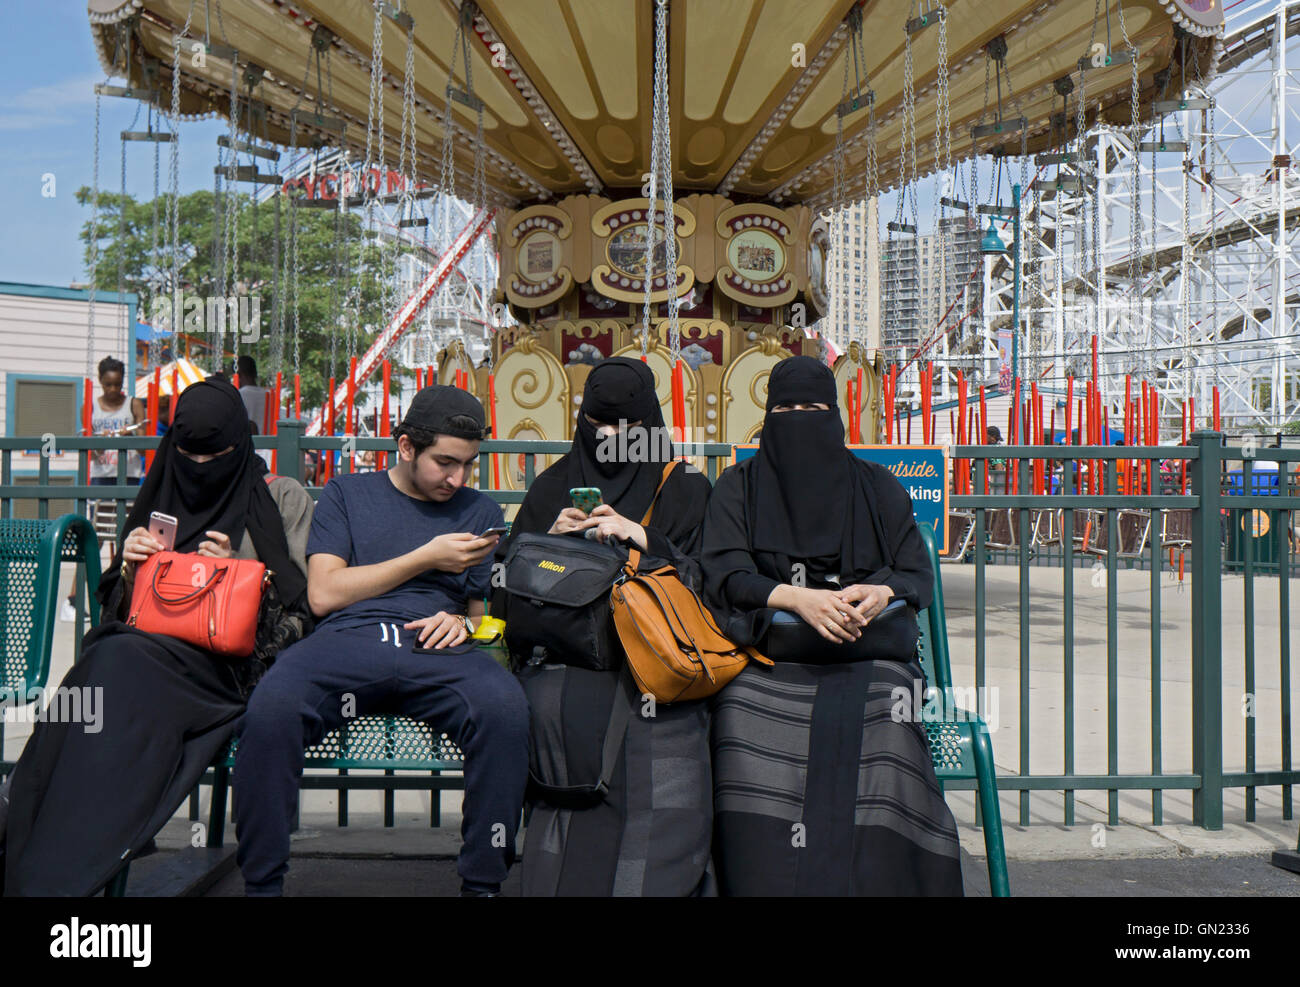 A Muslim family with women in burkas at Luna Park in Coney Island, Brooklyn, New York. Stock Photo